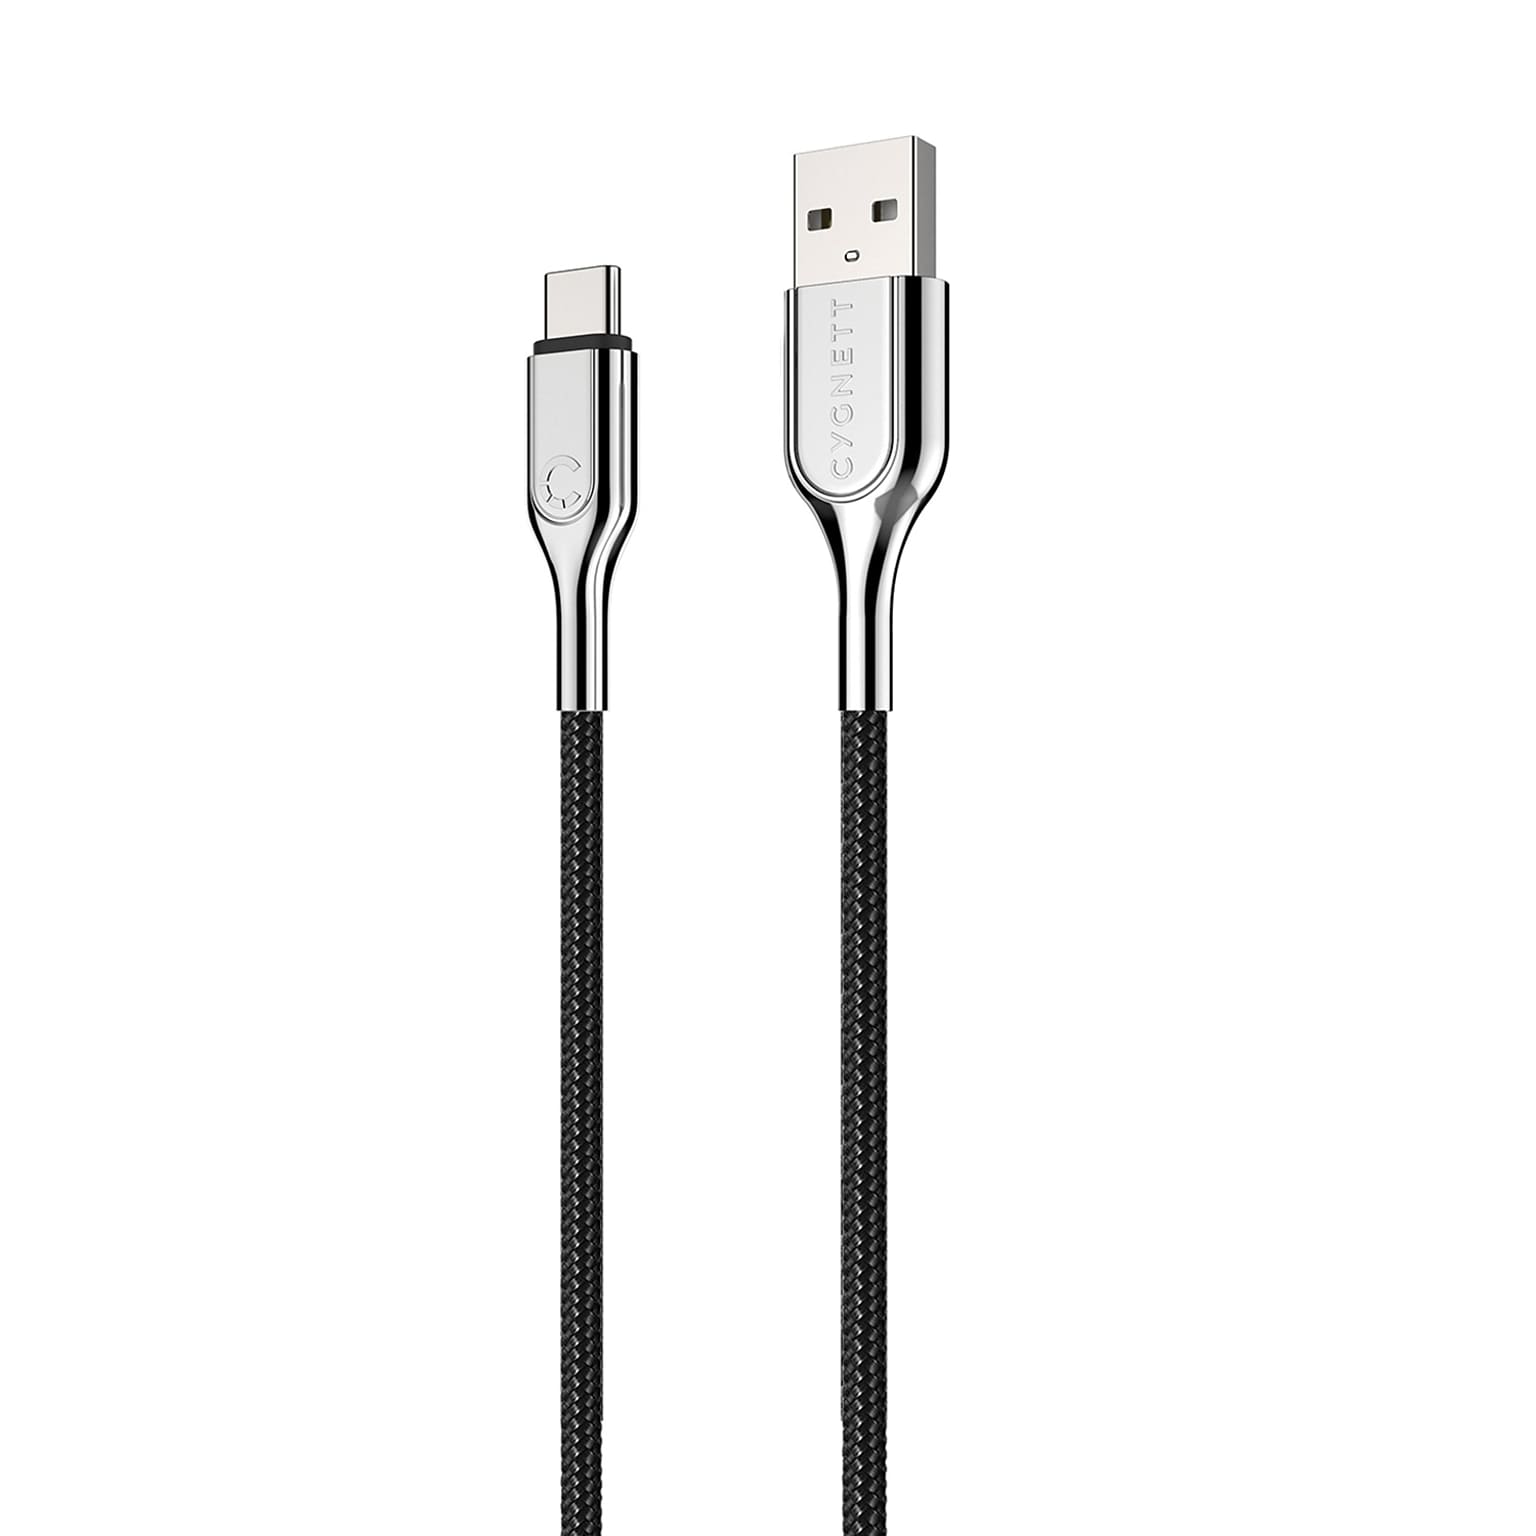 Cygnett Charge and Sync Cable, Armored 2.0 USB-C to USB-A Cable, 3, Black (CY2681PCUSA)